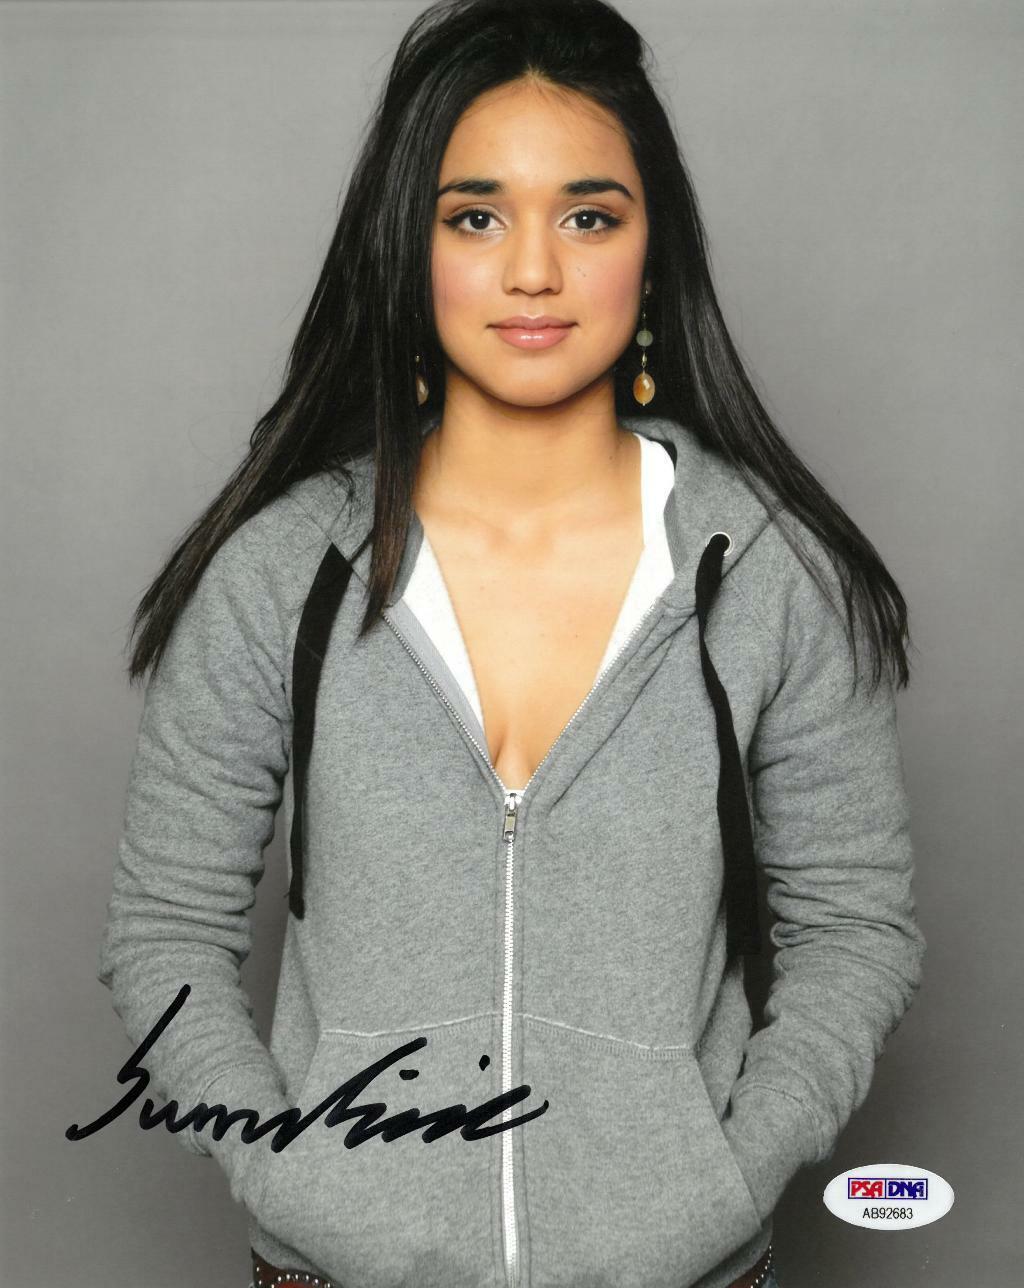 Summer Bishil Signed Authentic Autographed 8x10 Photo Poster painting PSA/DNA #AB92683